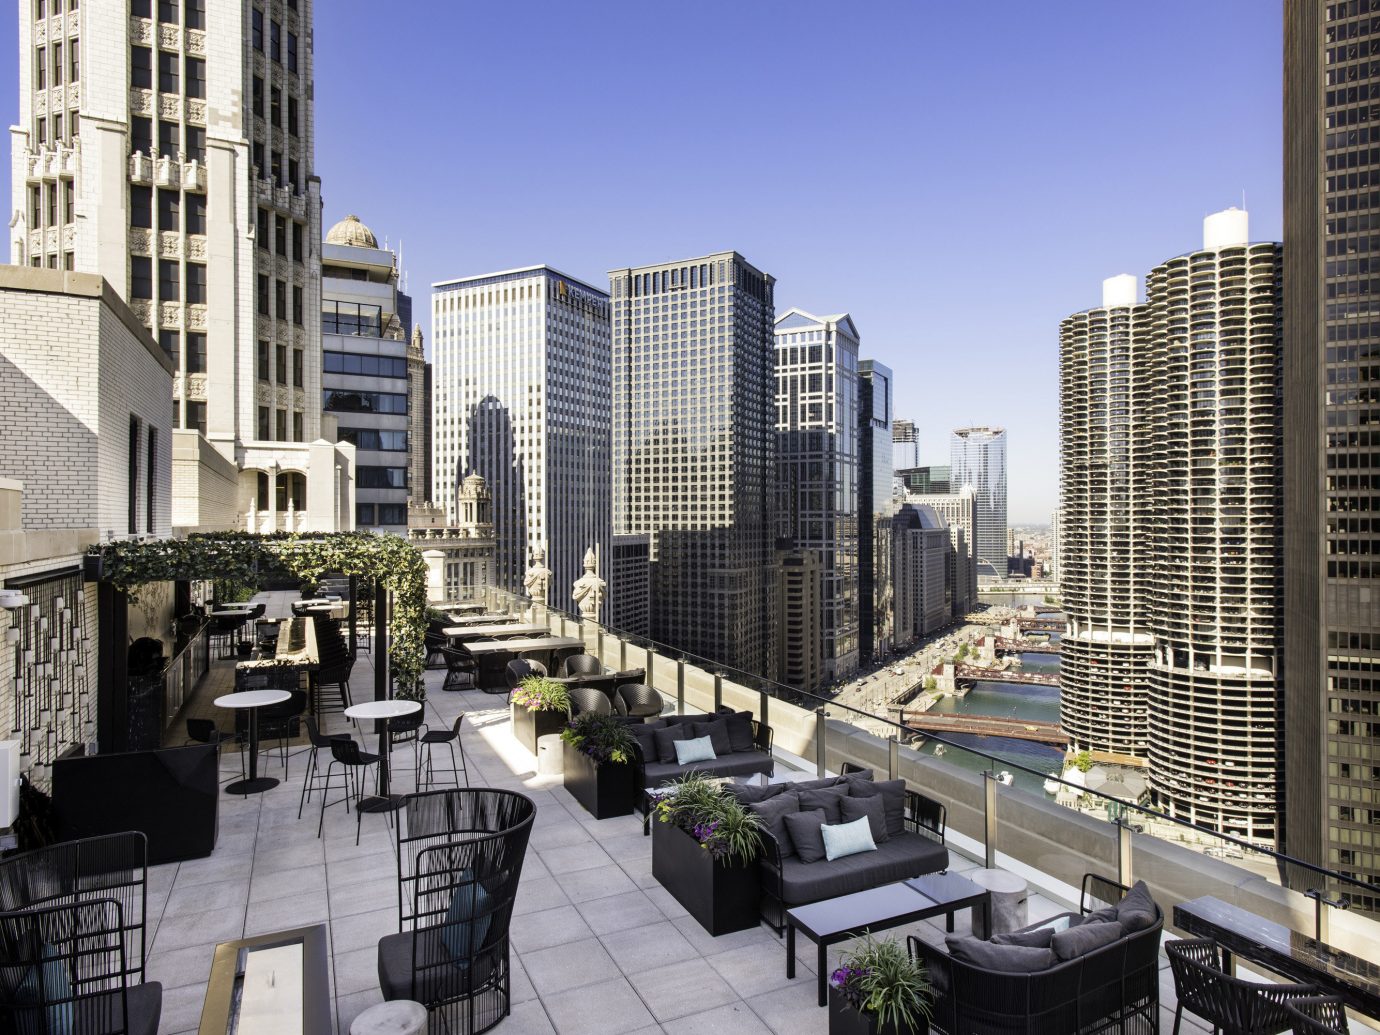 Patio view at LondonHouse Chicago, Curio Collection by Hilton